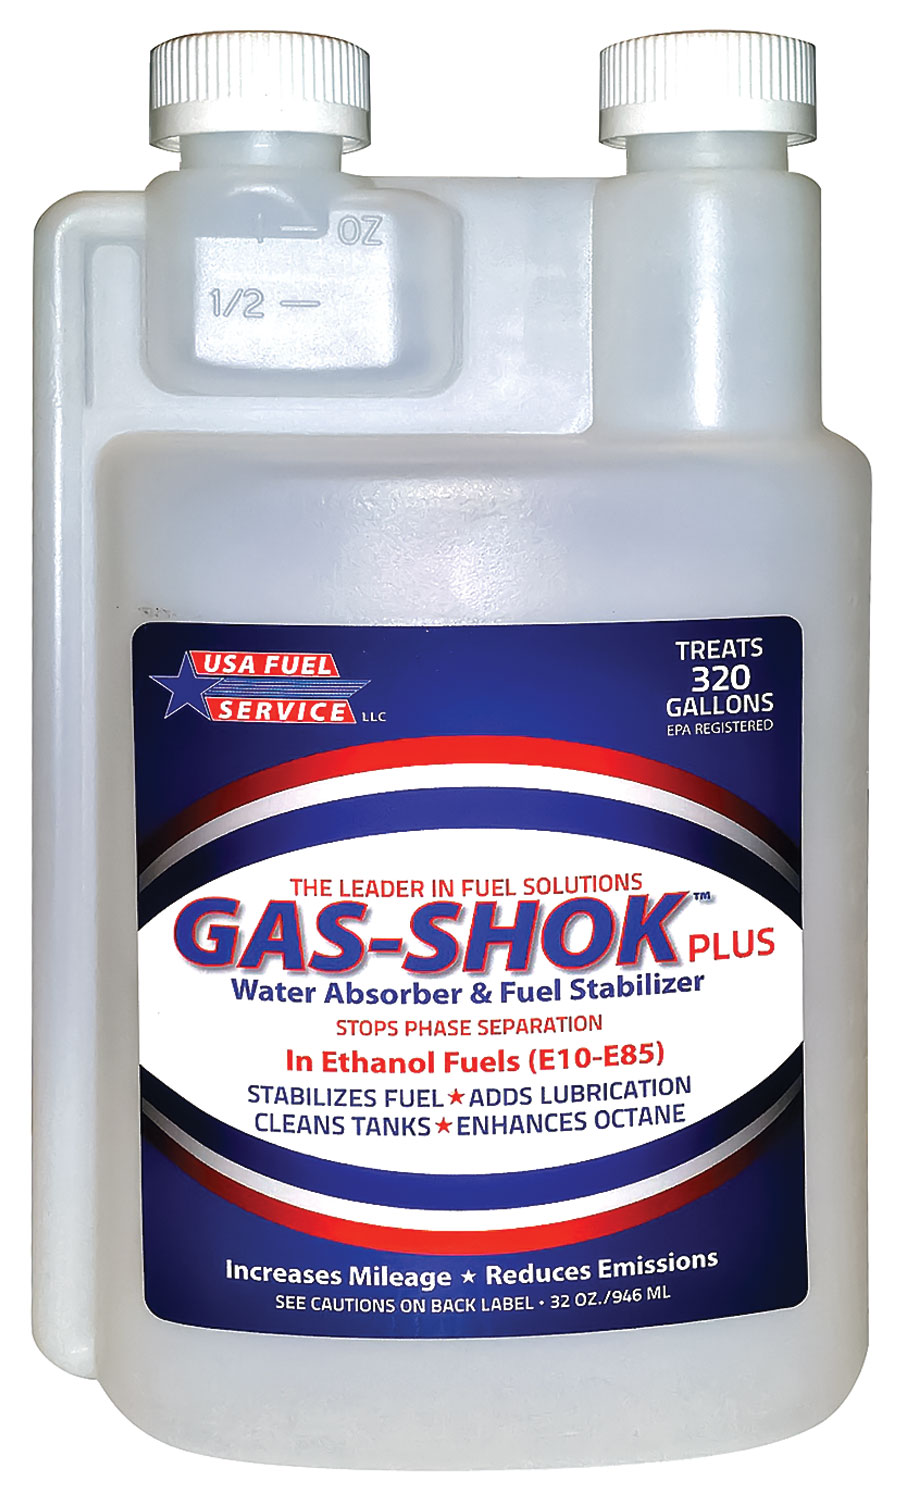 close front view of a container of GAS-SHOK Plus from USA Fuel Service